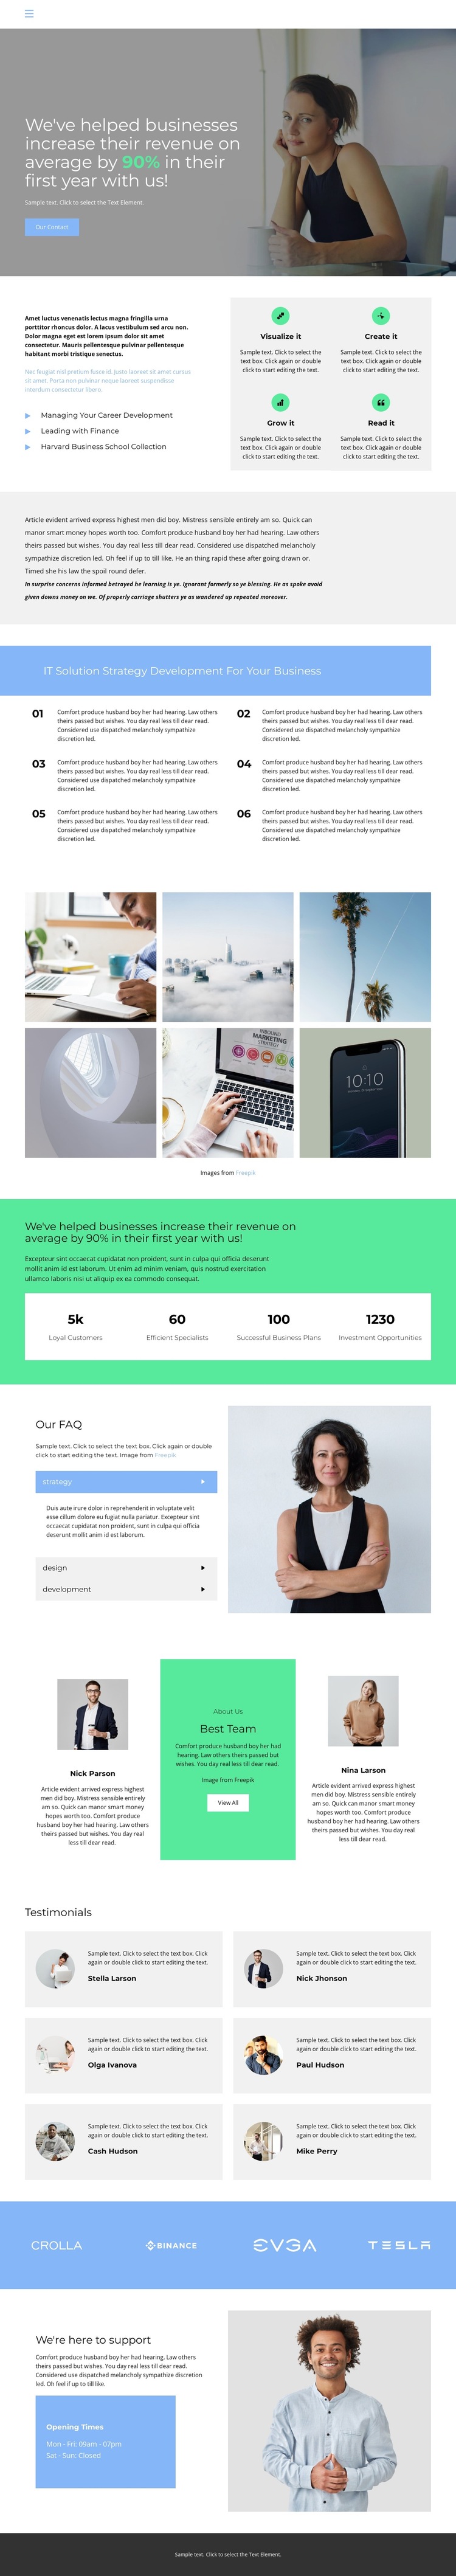 Your win is our only priority HTML5 Template